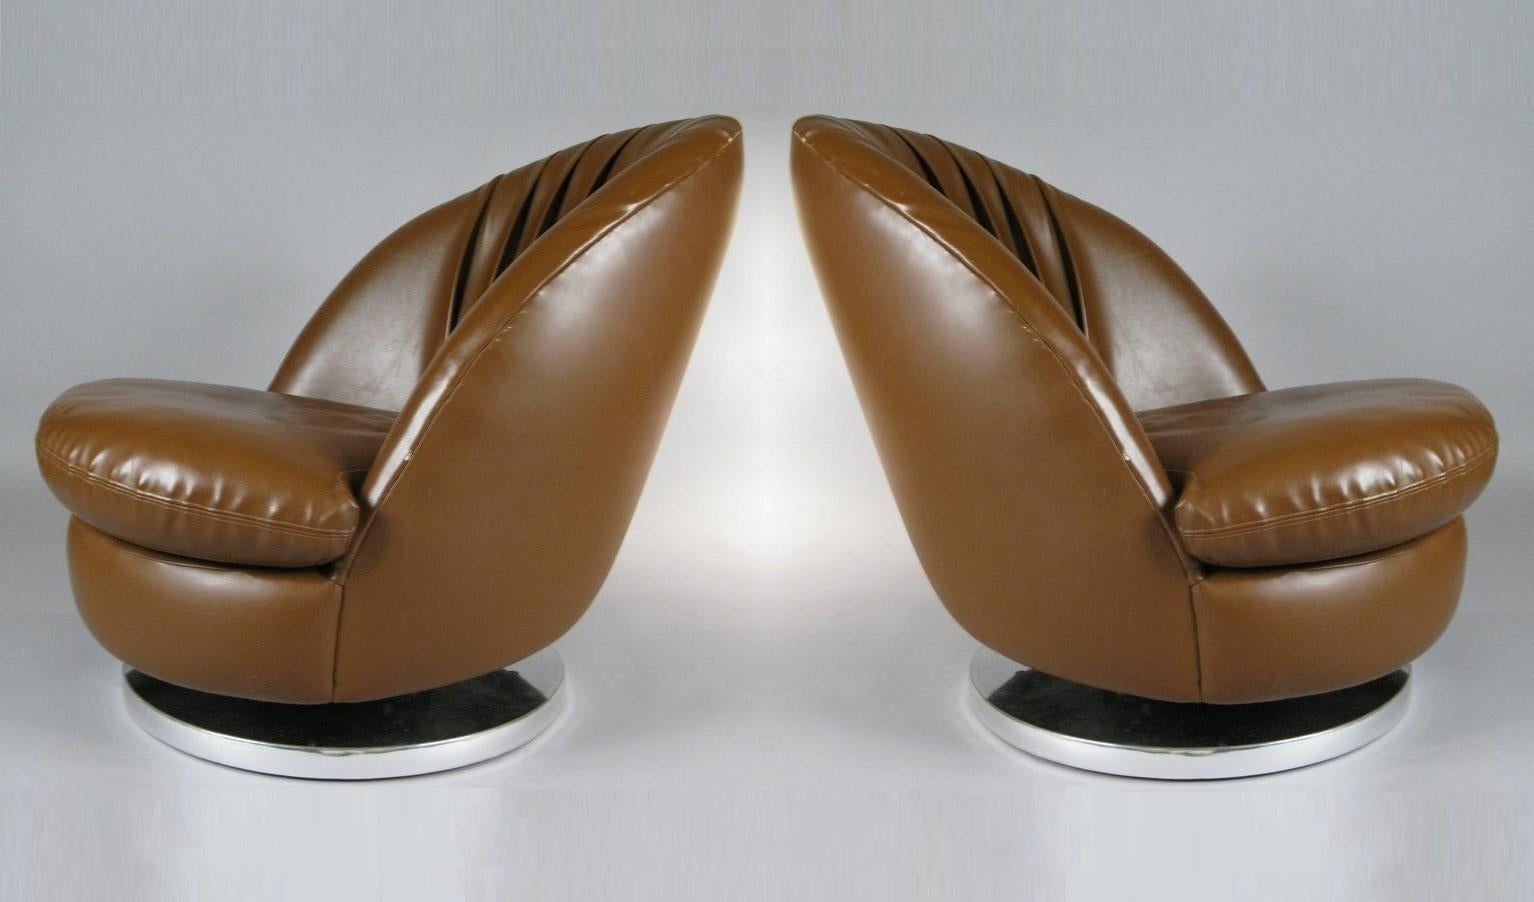 This pair of modern brown chairs designed by Milo Baughman for Thayer Coggin. These chairs are reminiscent of open scallop shells, the seats are deep and comfortable. Chairs rotate 360 degrees, tilt back and are mounted on chrome bases. Their